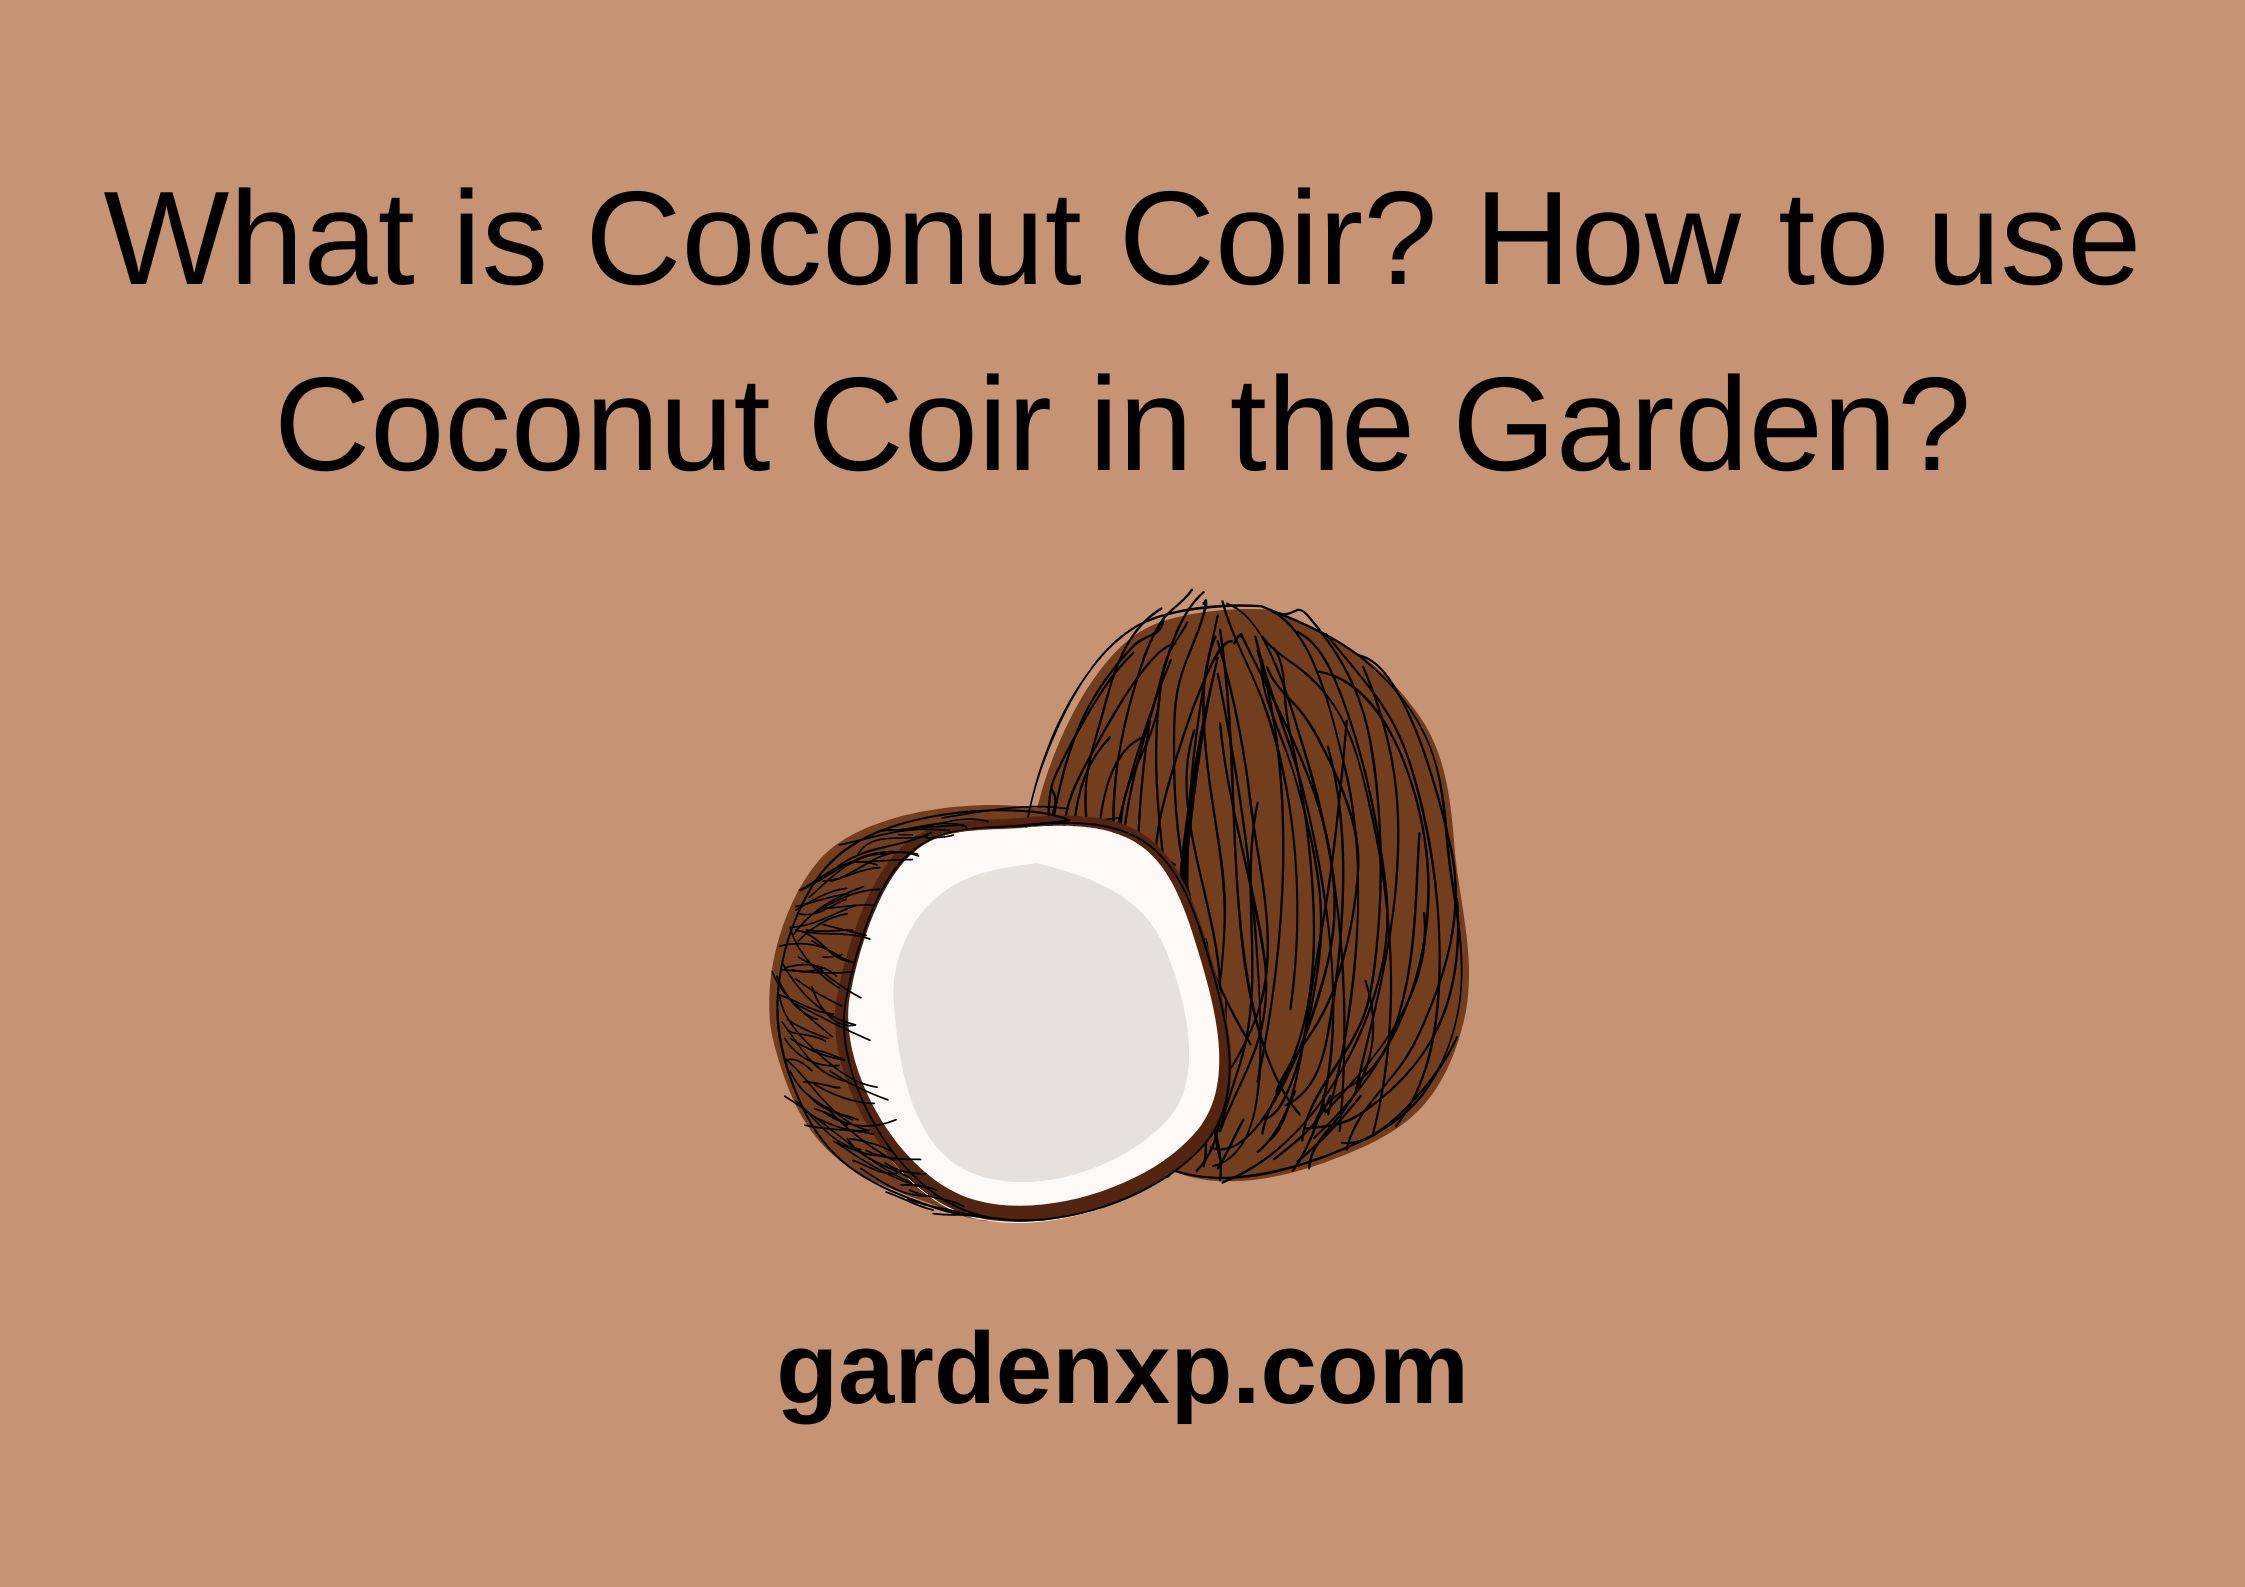 What is Coconut Coir? How to use Coconut Coir in the Garden?